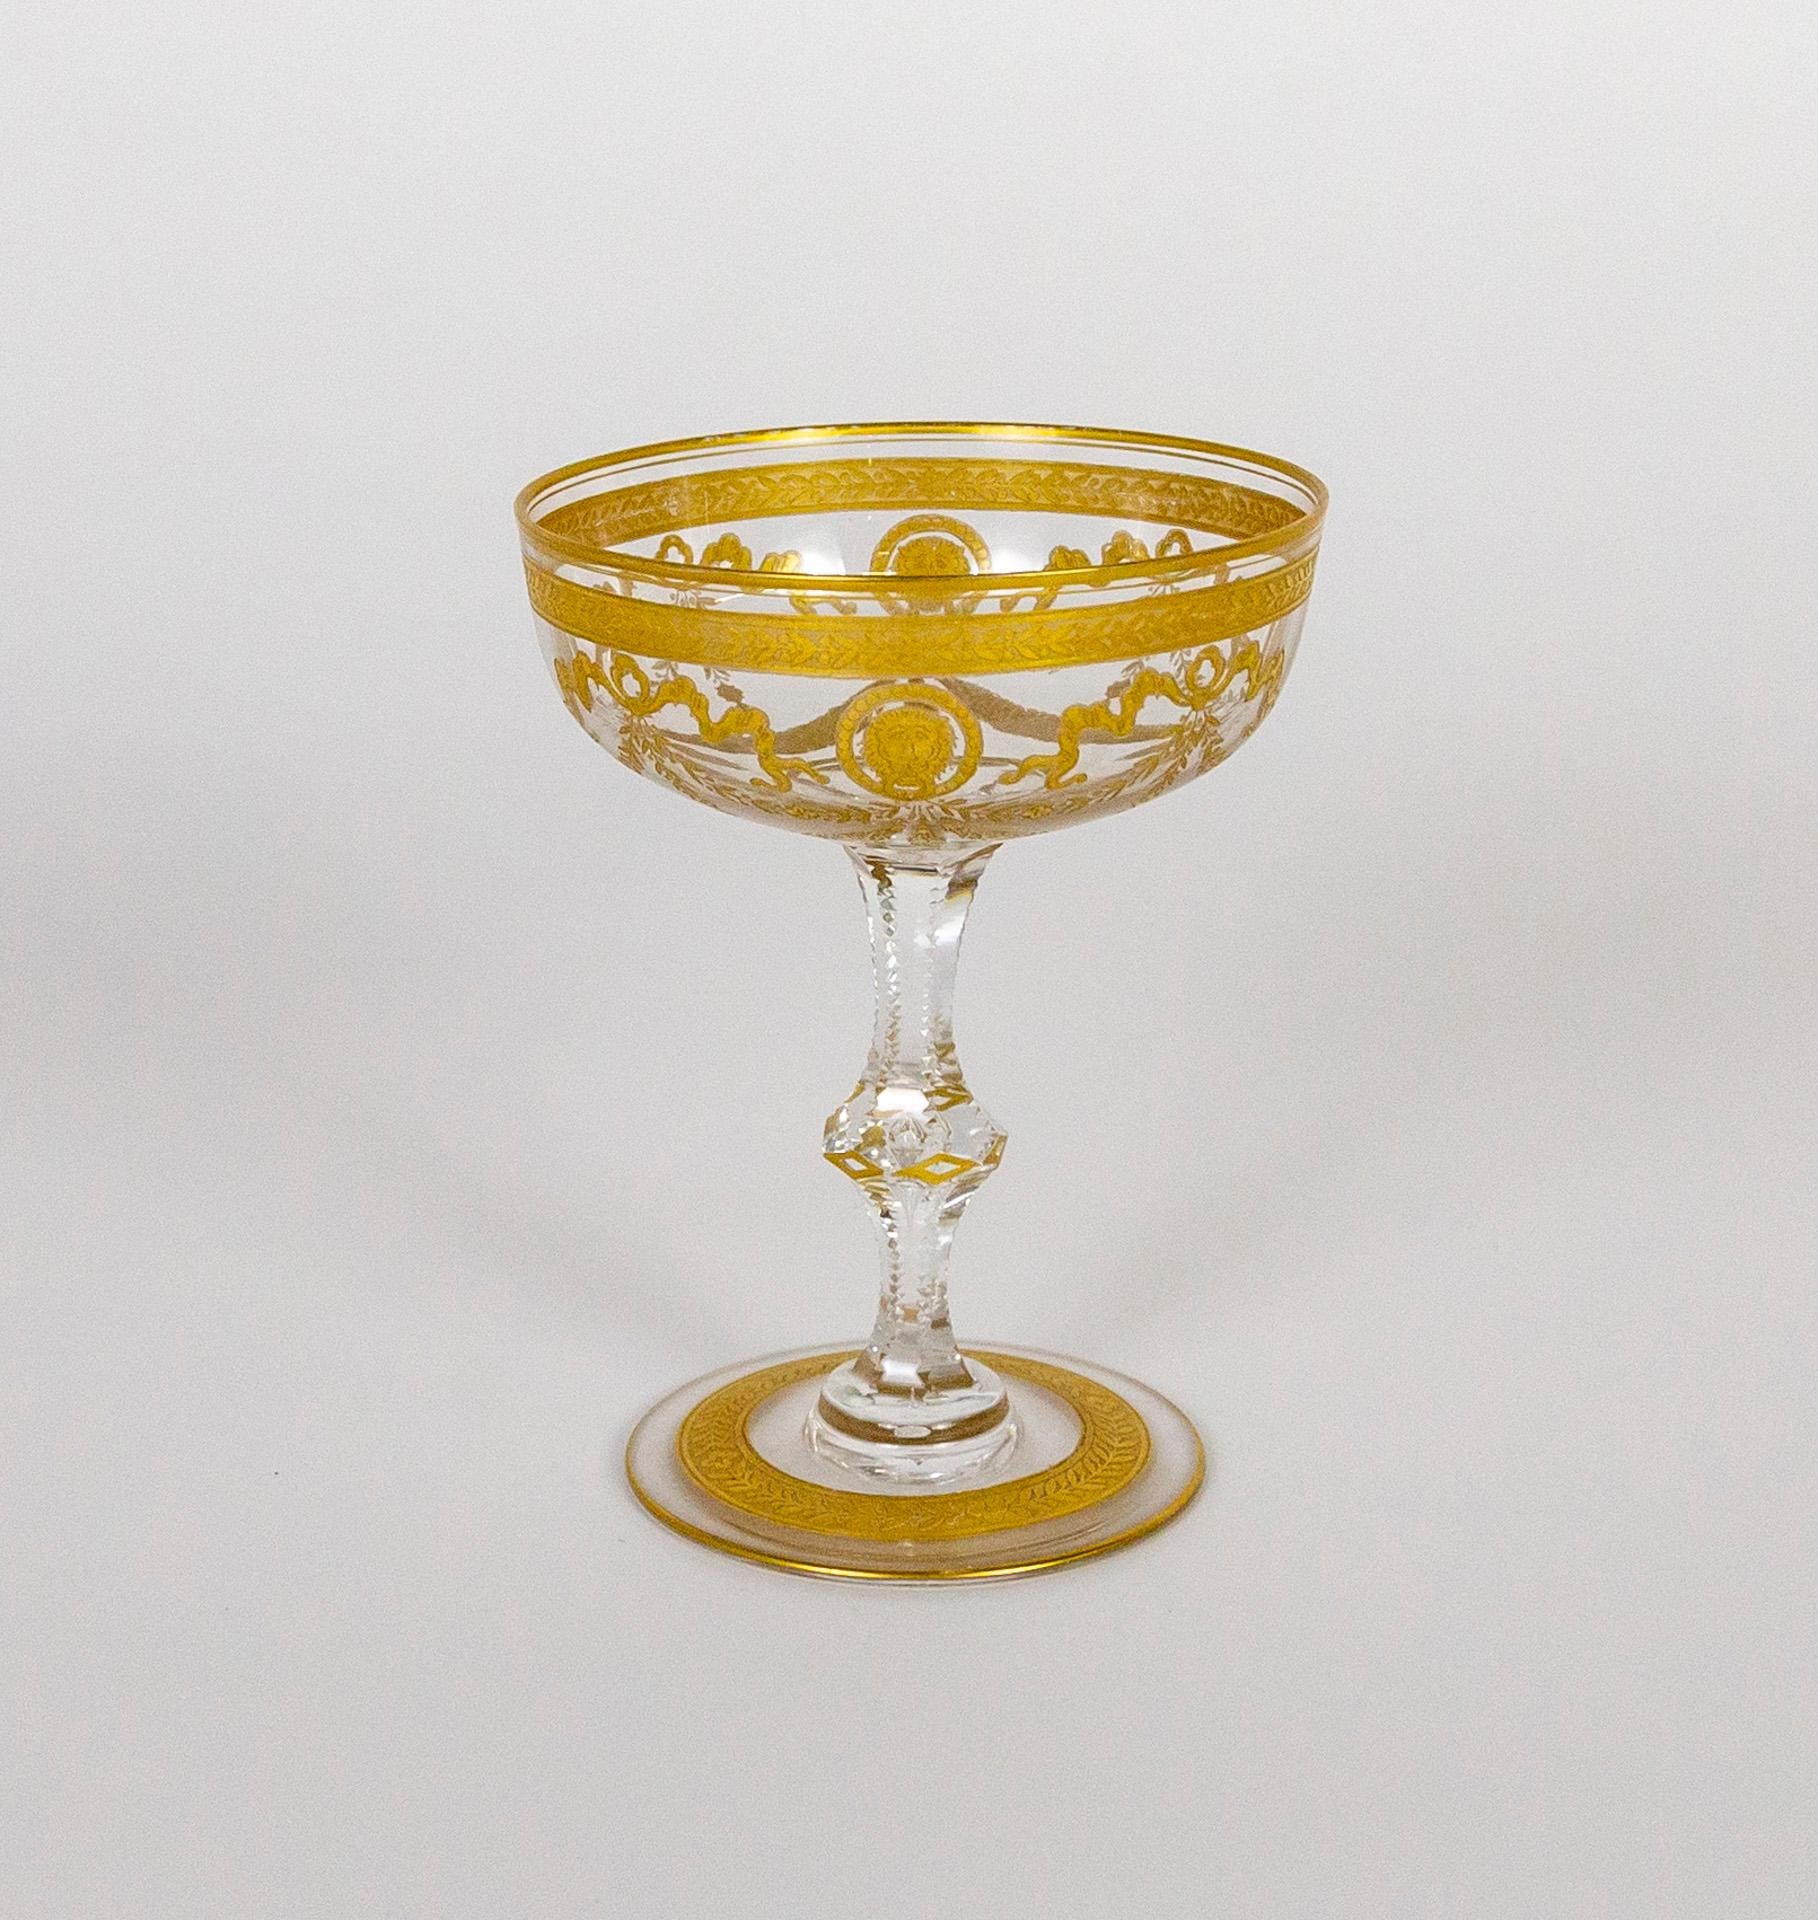 A set of 4, antique, mouth-blown, coupe champagne glasses, cut and etched, with an intricate gold motif of ribbon, floral garlands, and lion faces. Made by the renowned St. Louis glass company in France in the early 1900s. Measures: 4.75